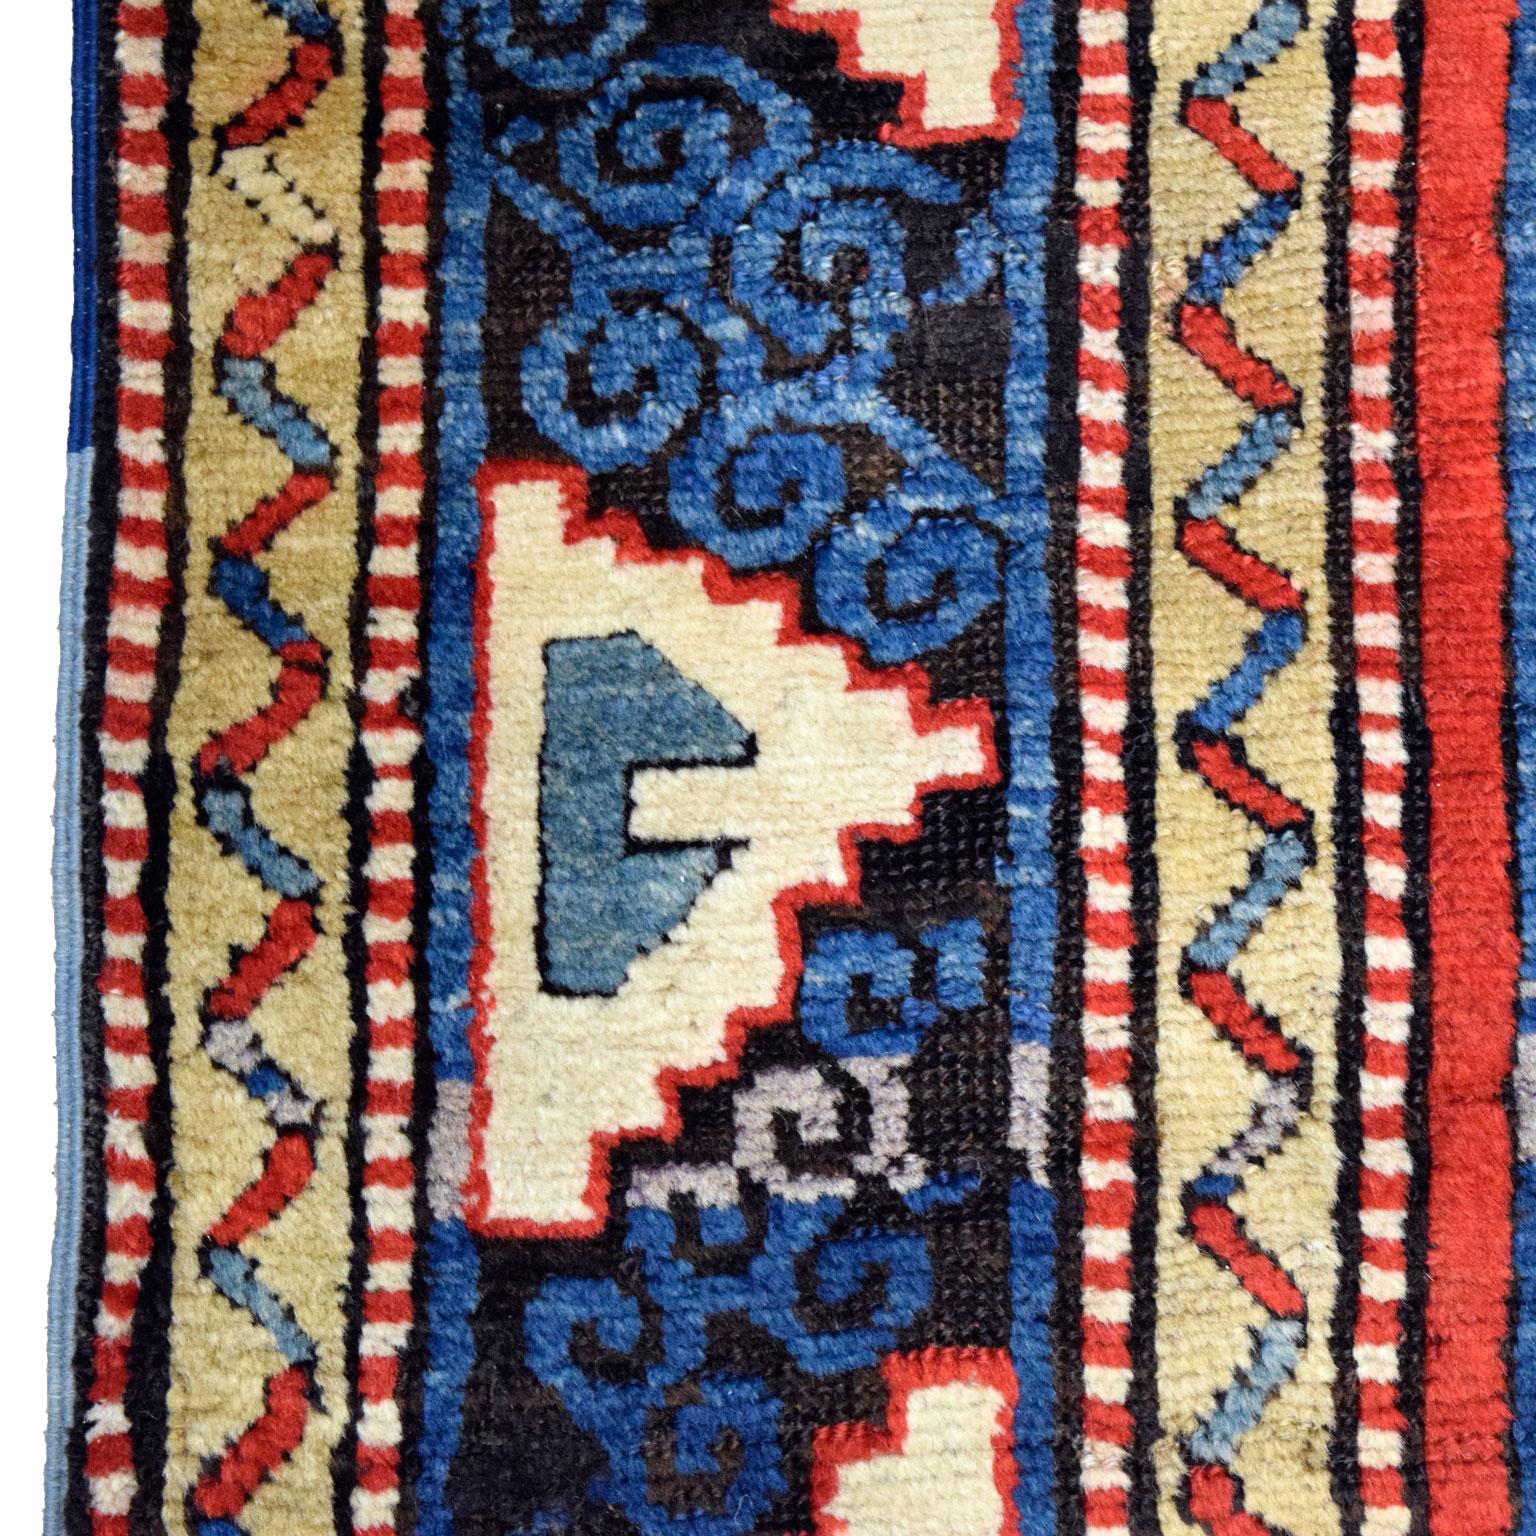 Antique 1880s Caucasian Rug, Red, Blue, and Cream, 5' x 7' In Good Condition For Sale In New York, NY